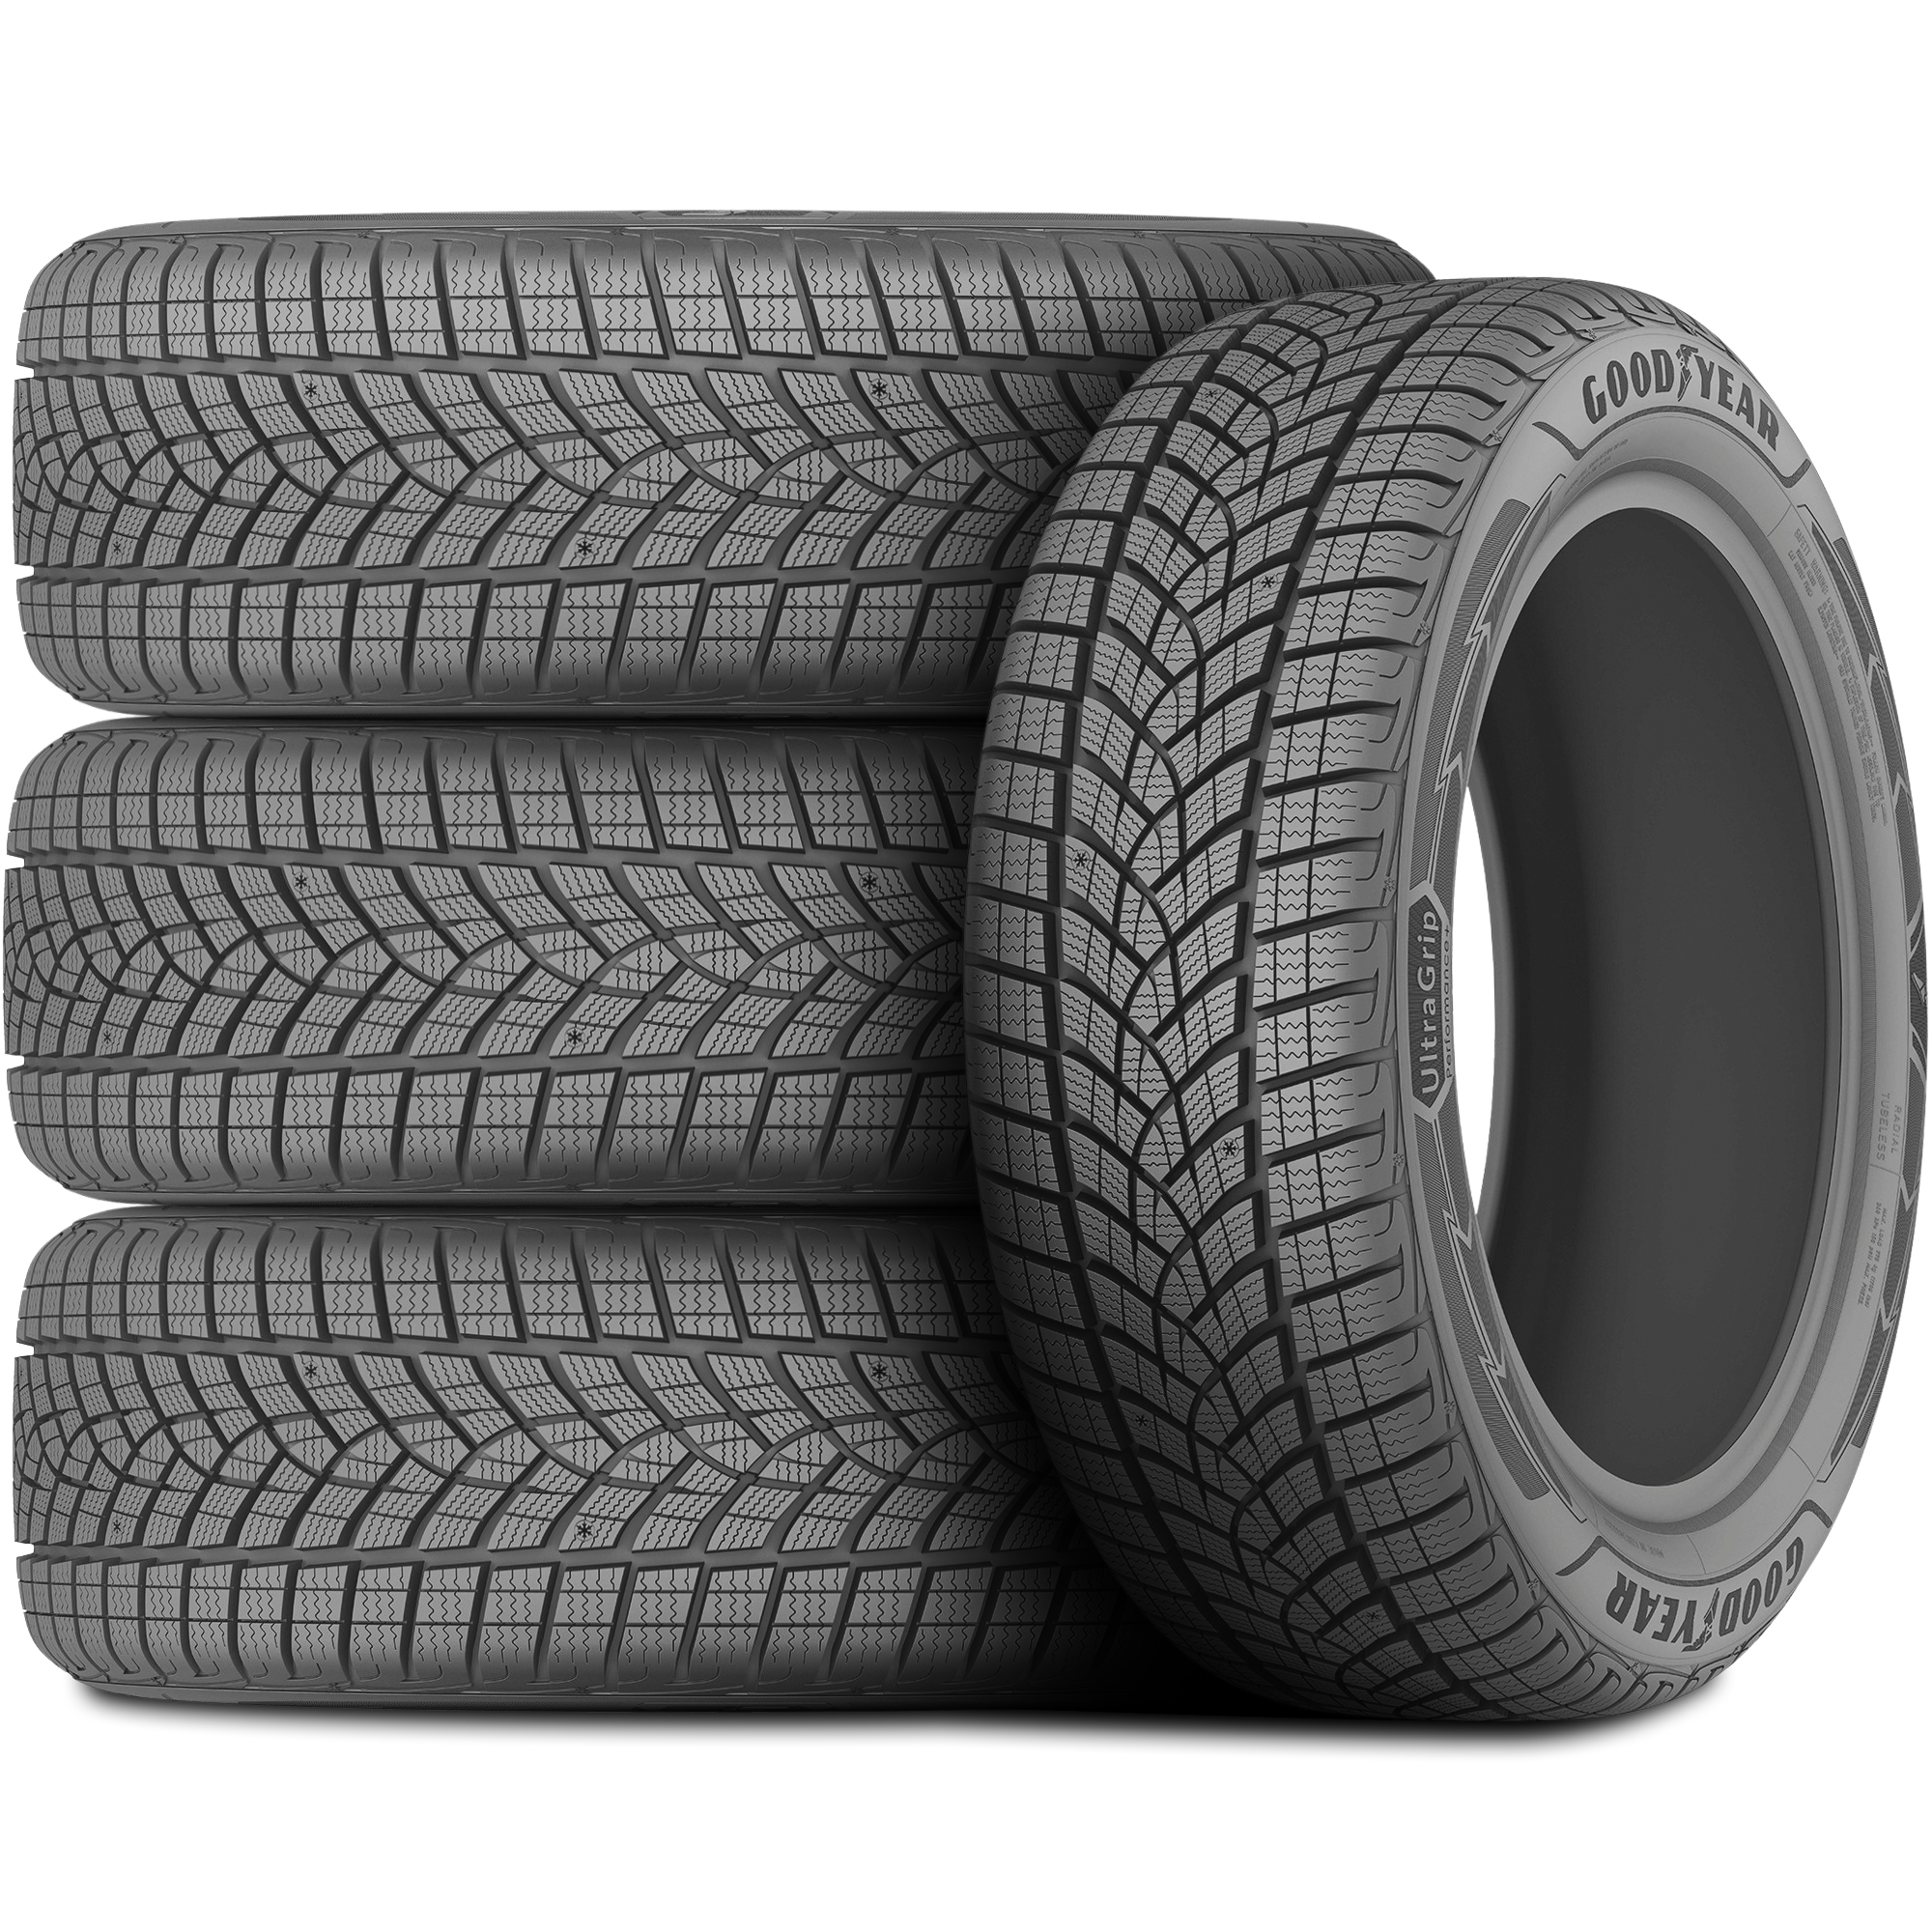 Goodyear 4 Tires Goodyear Ultra Grip Performance + SUV 215/70R16 100T (Studless) Winter